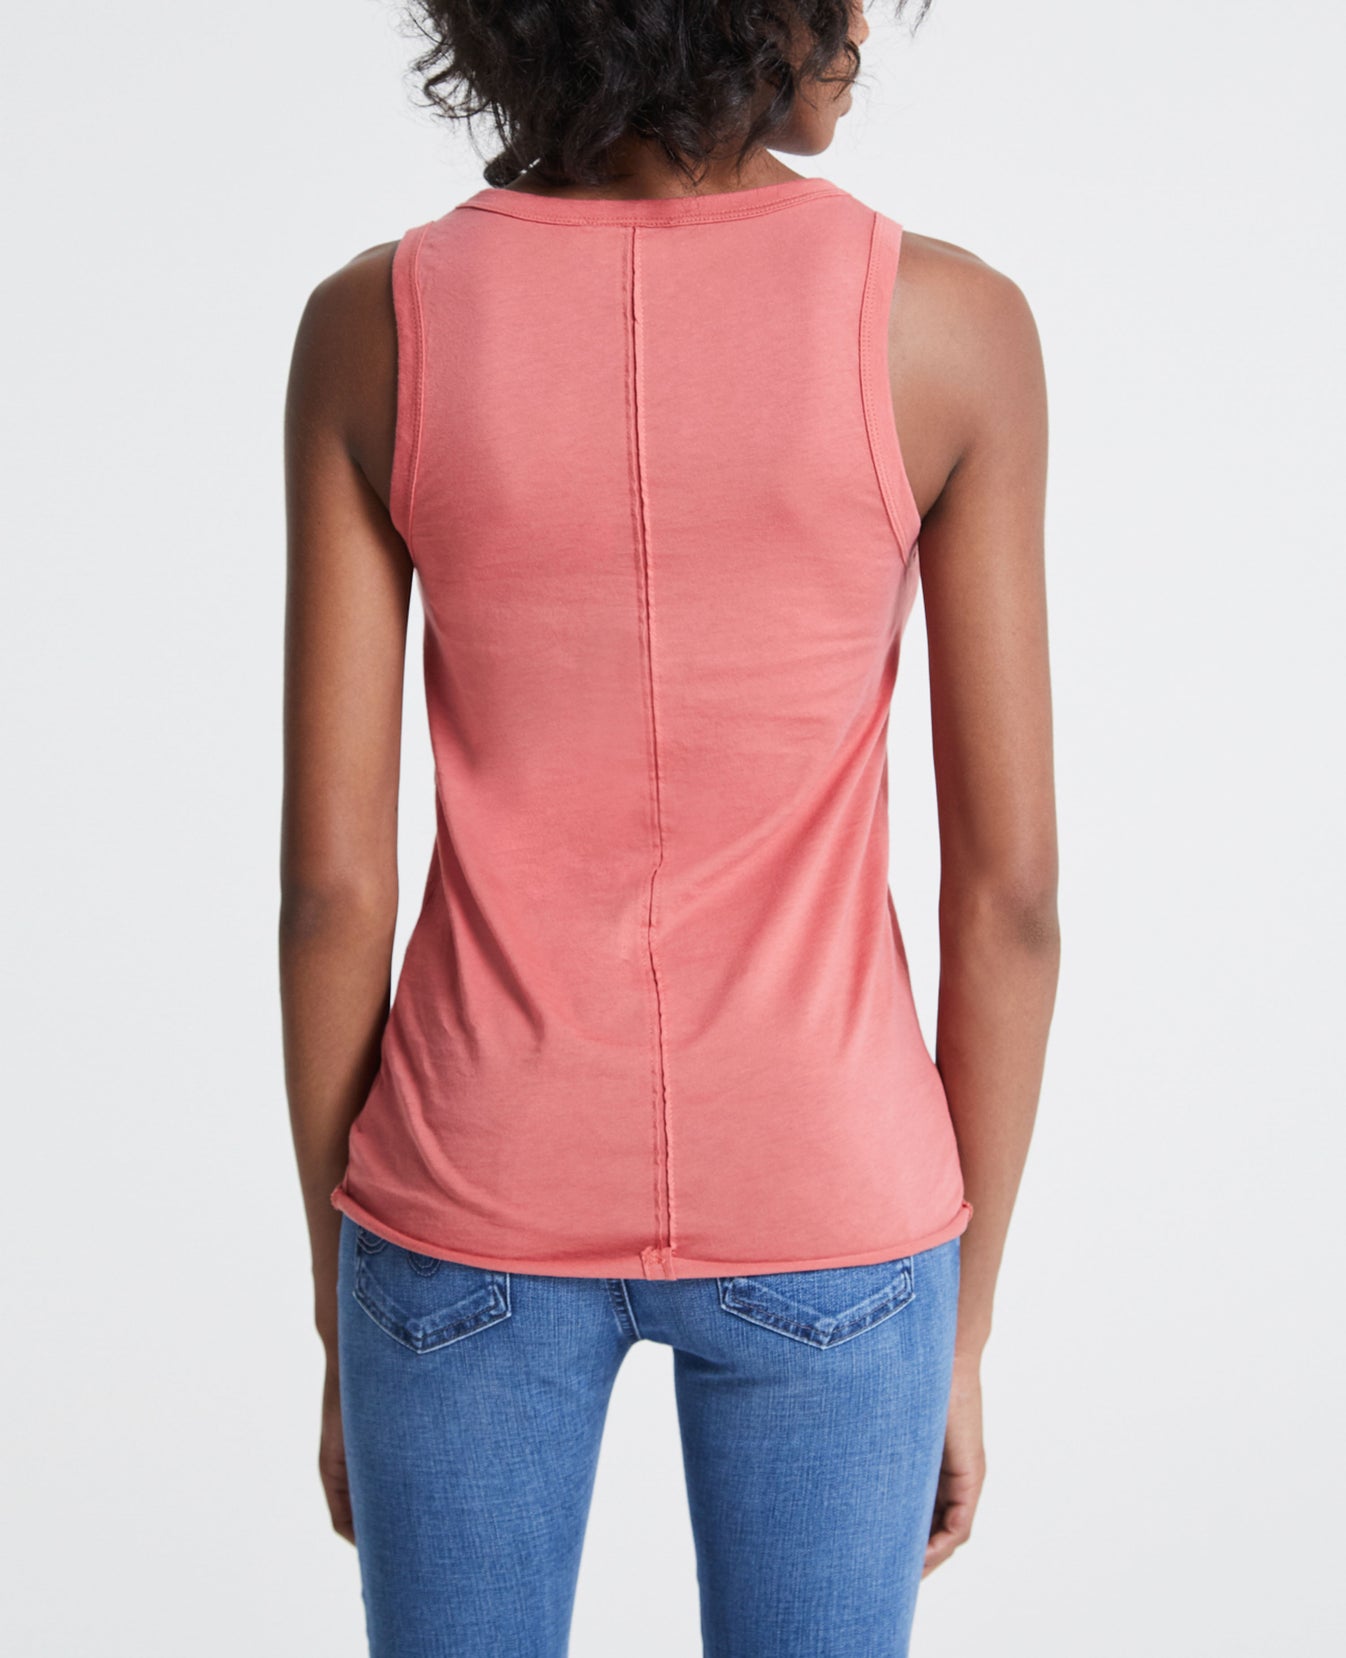 Lexi Tank Candy Apple Fitted Tank Women Tops Photo 3